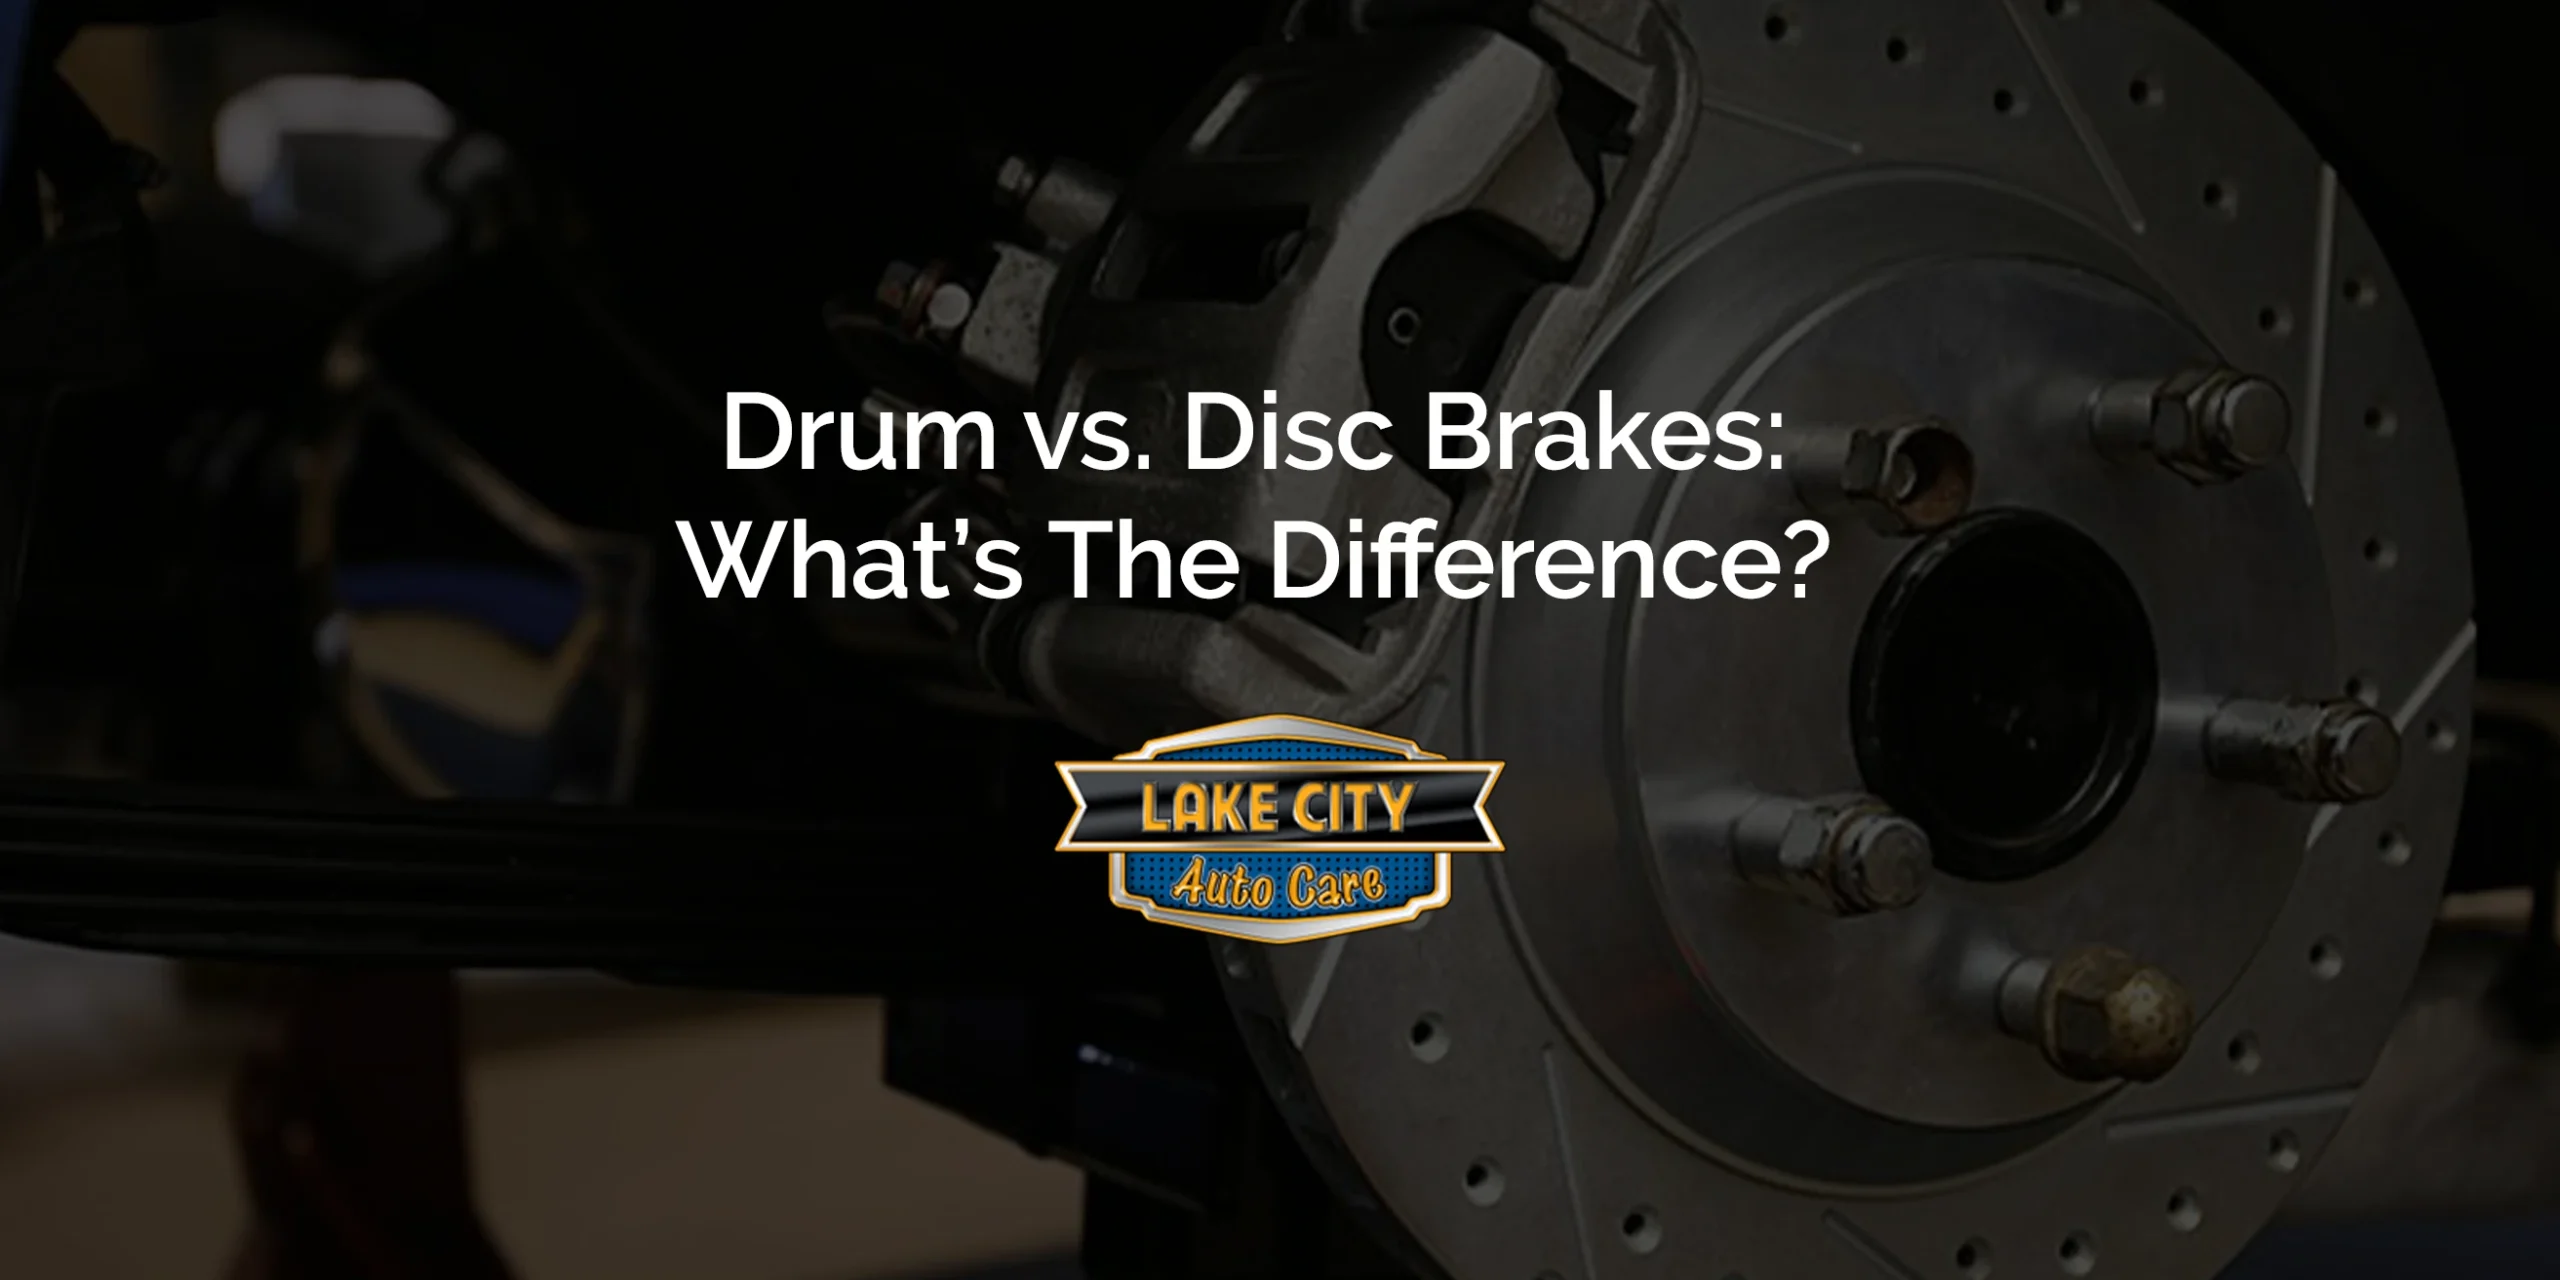 Drum vs. Disc Brakes: What’s The Difference?